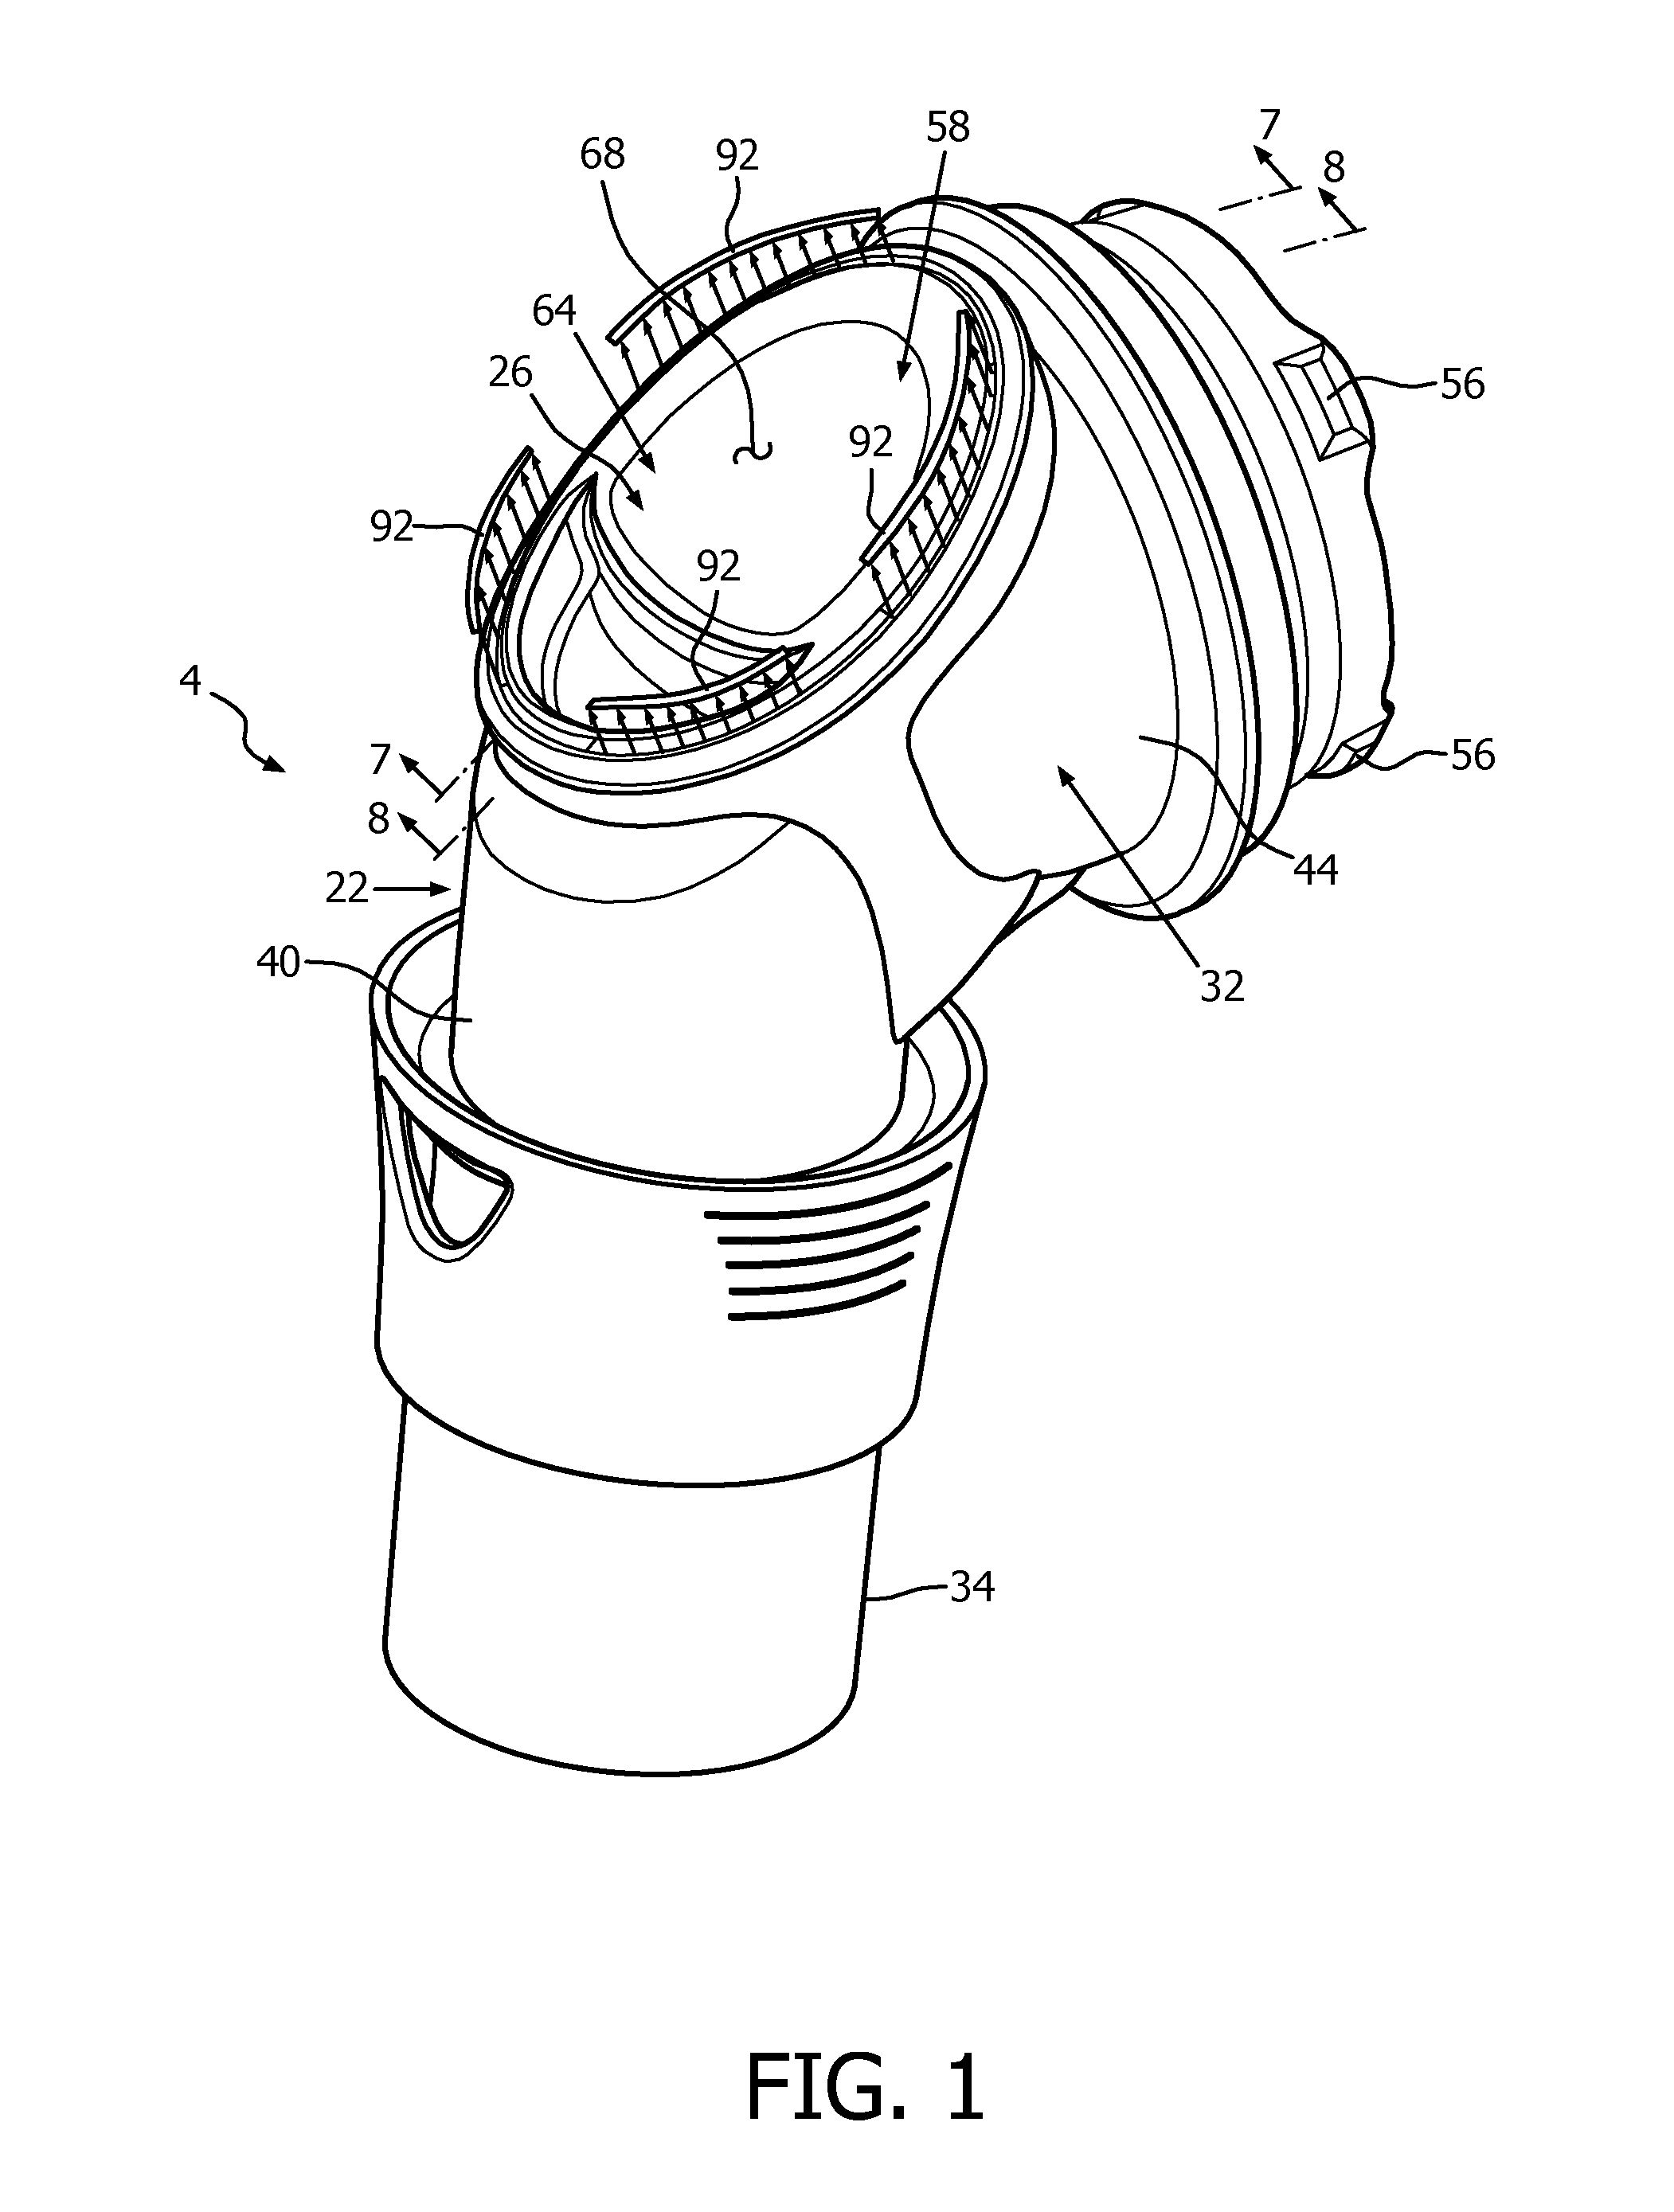 Fluid connector with exhaust valve